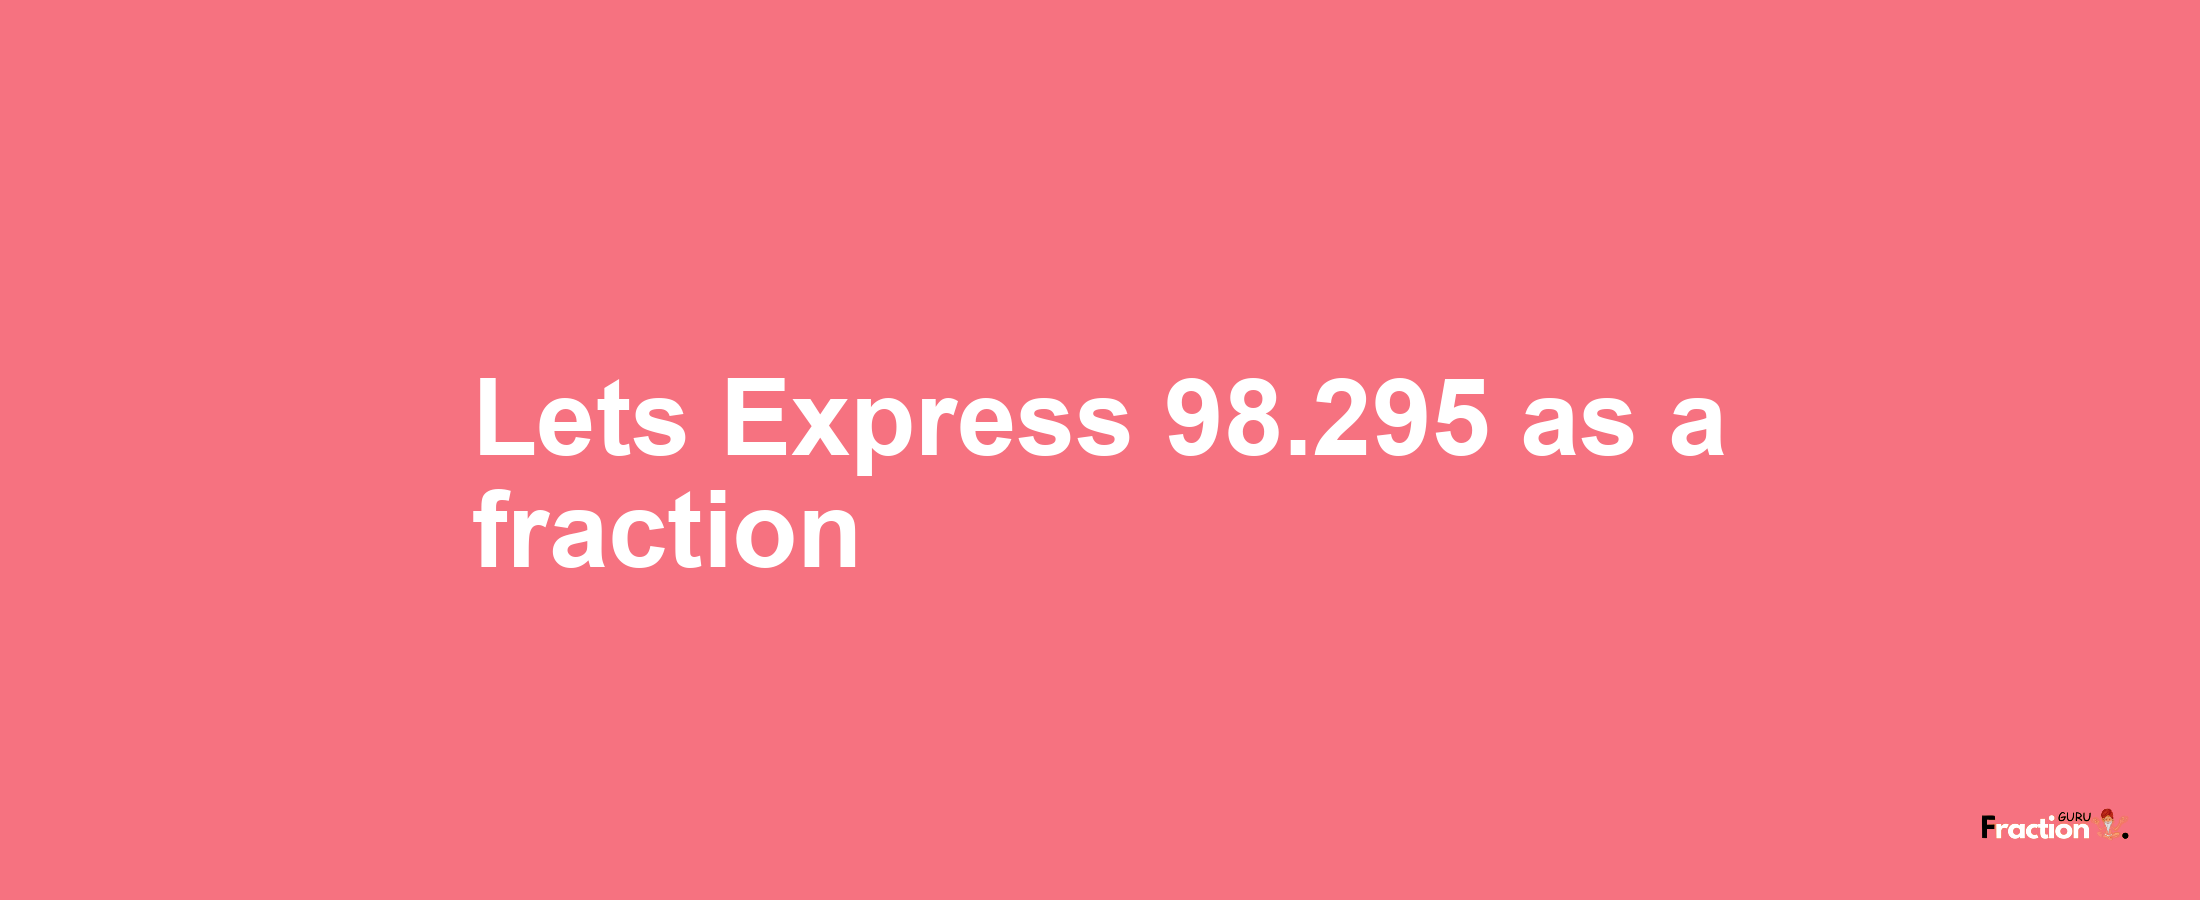 Lets Express 98.295 as afraction